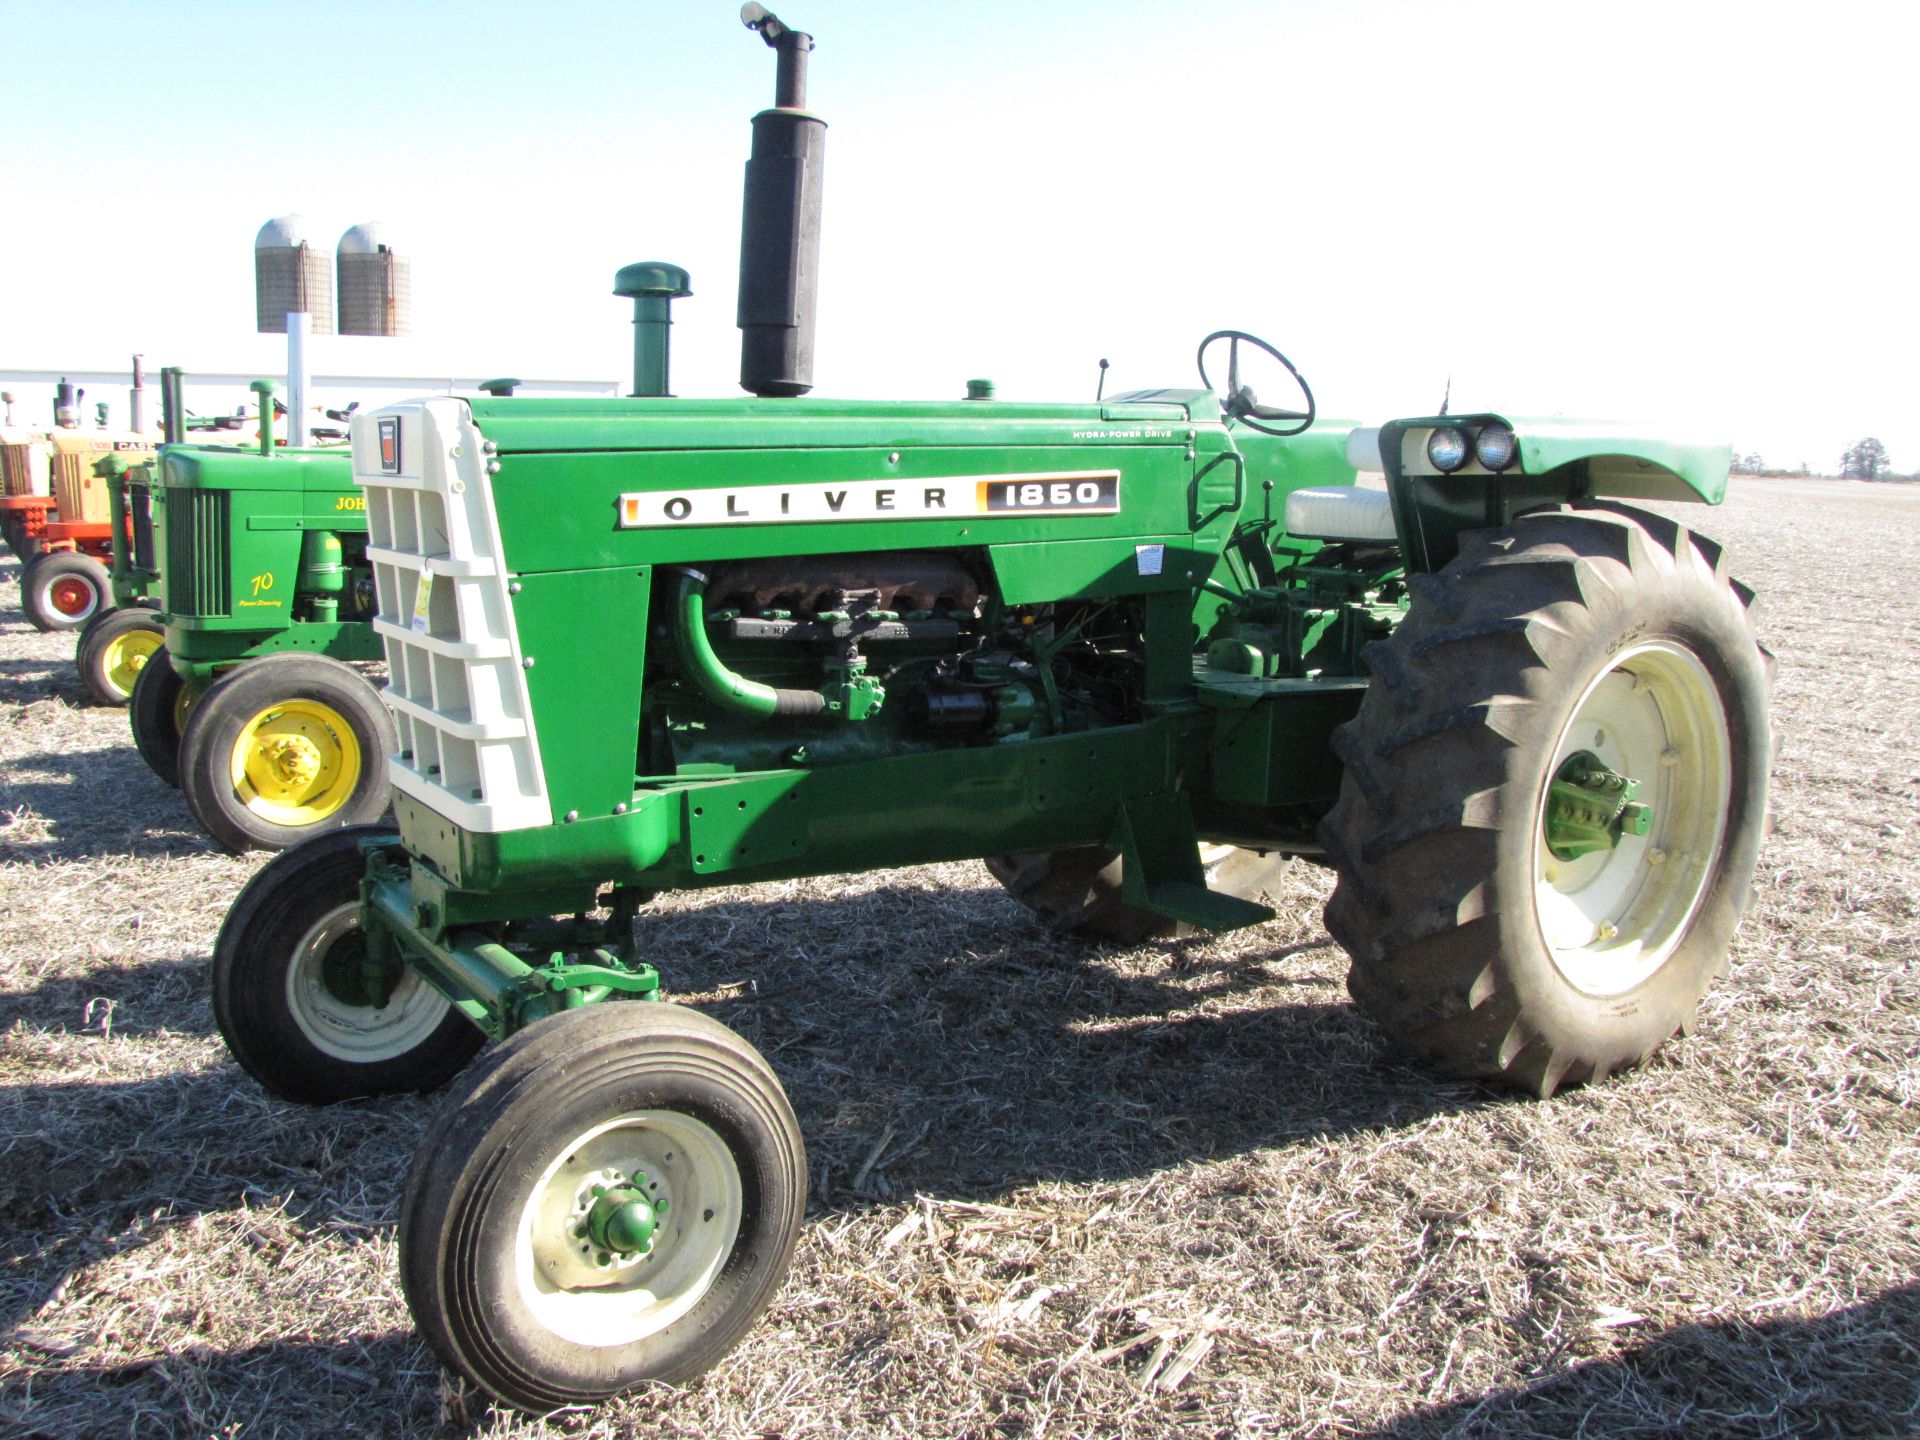 Oliver 1850 Tractor - Image 8 of 47